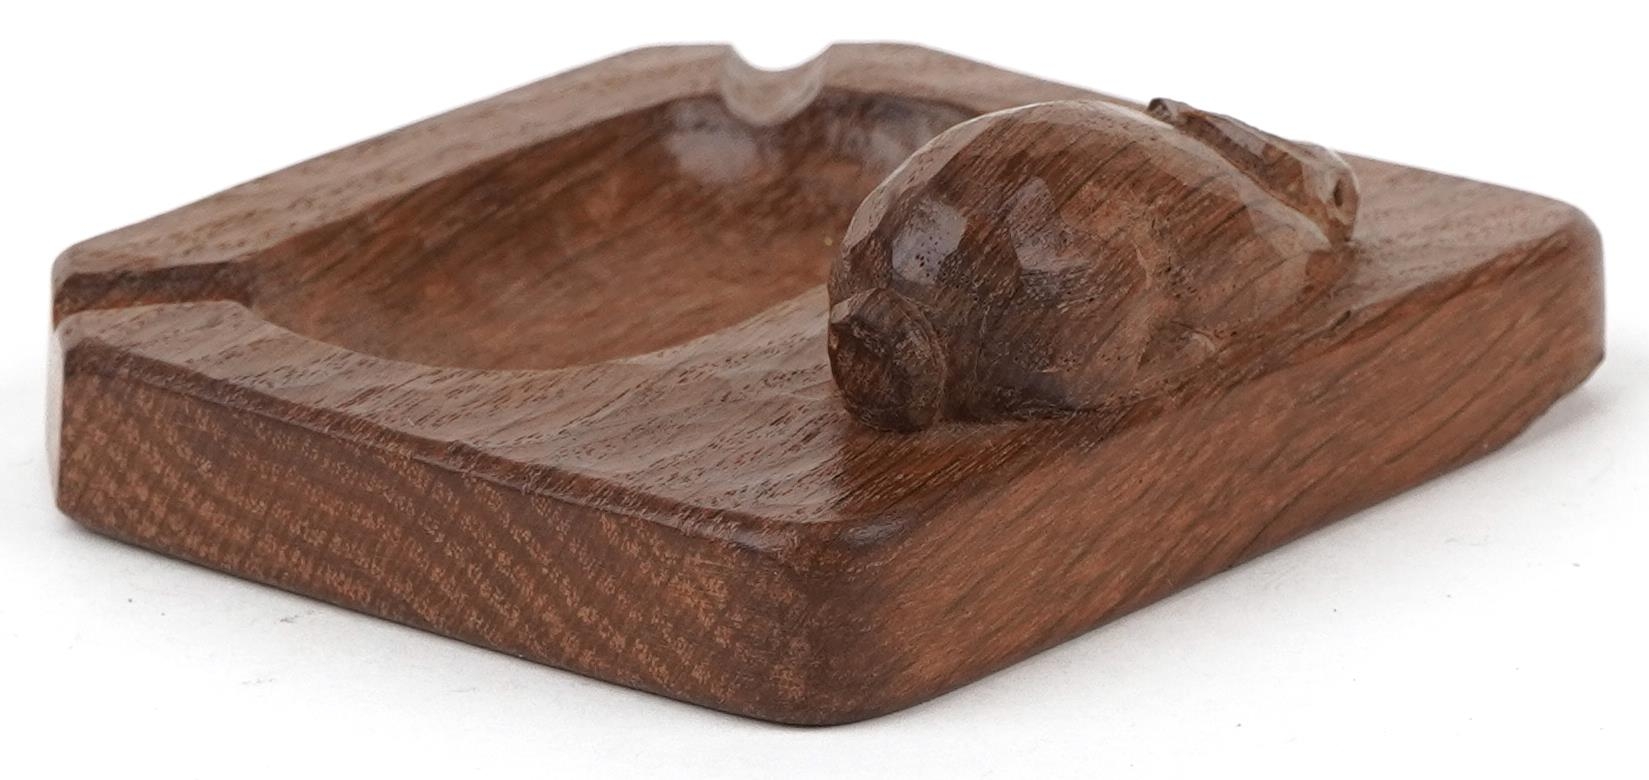 Peter Rabbitman Heap of Wetwang adzed oak ashtray carved with a rabbit, 10cm wide - Image 2 of 4